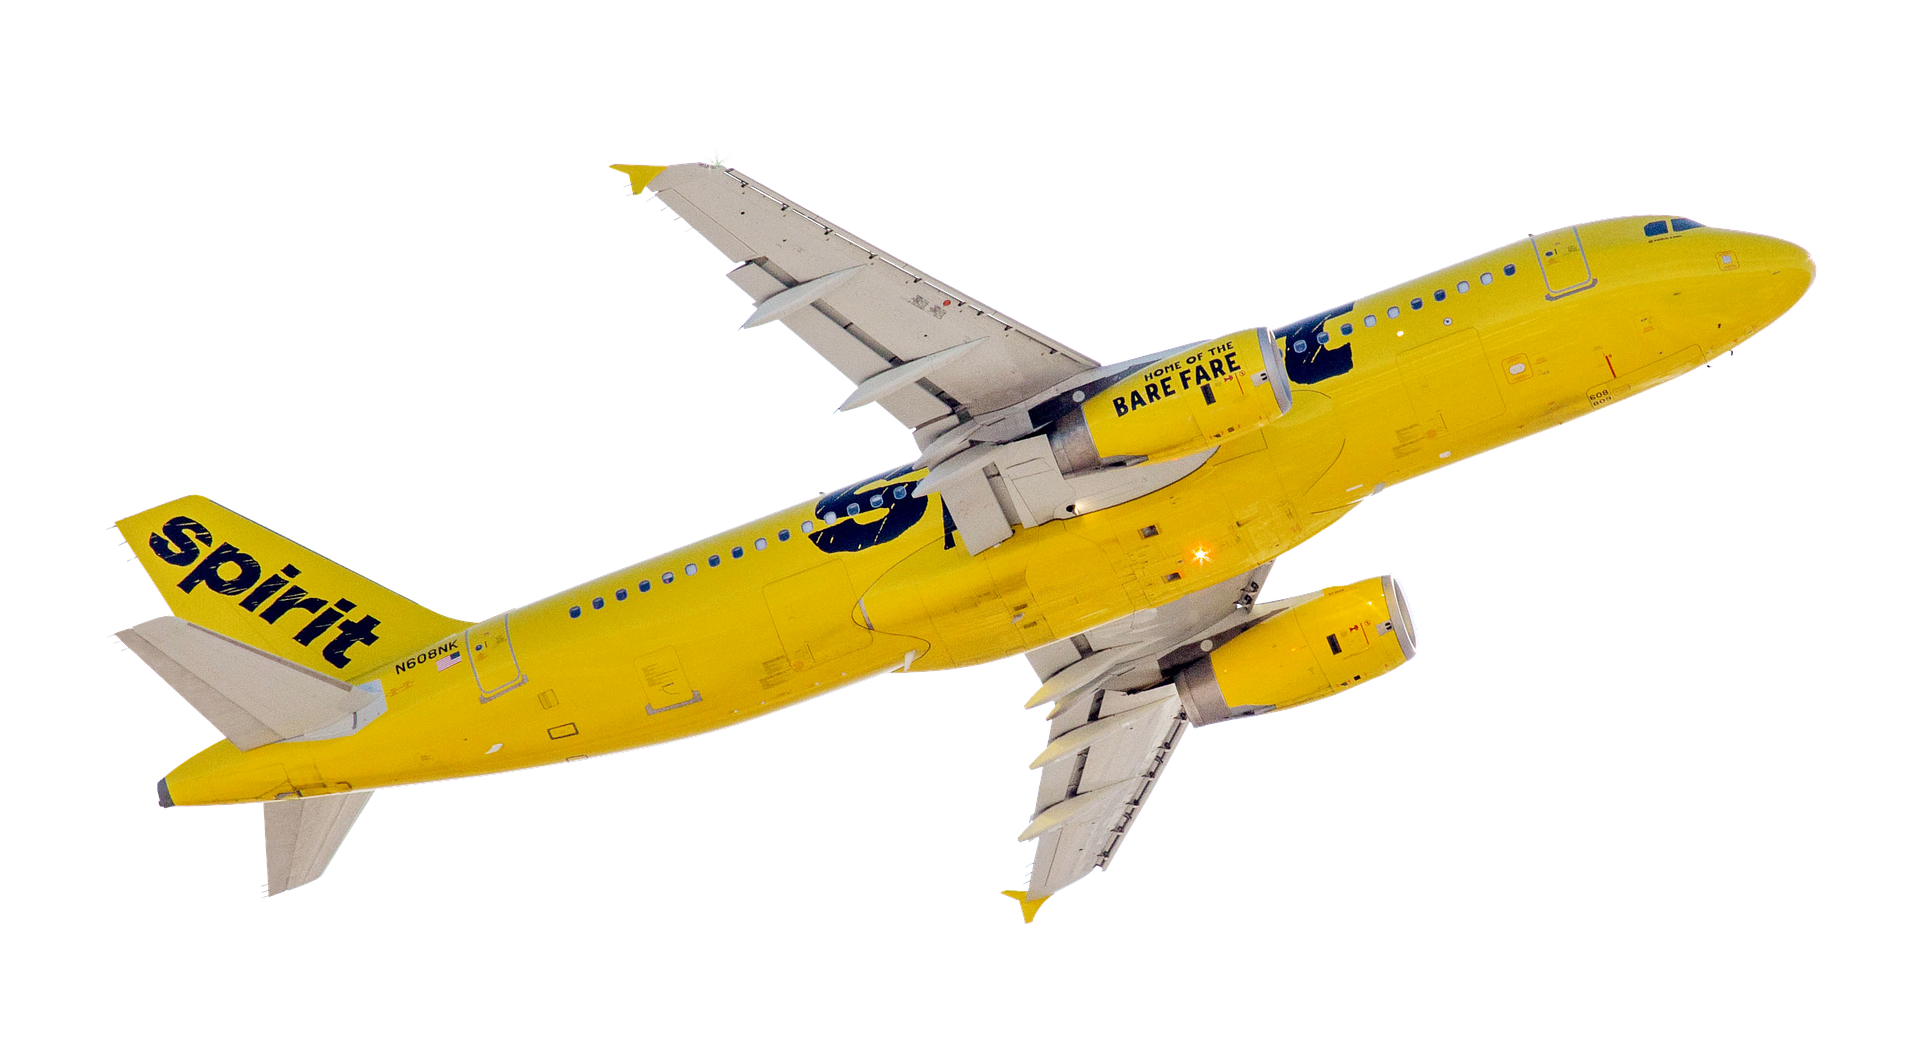 A Yellow Airplane In The Sky